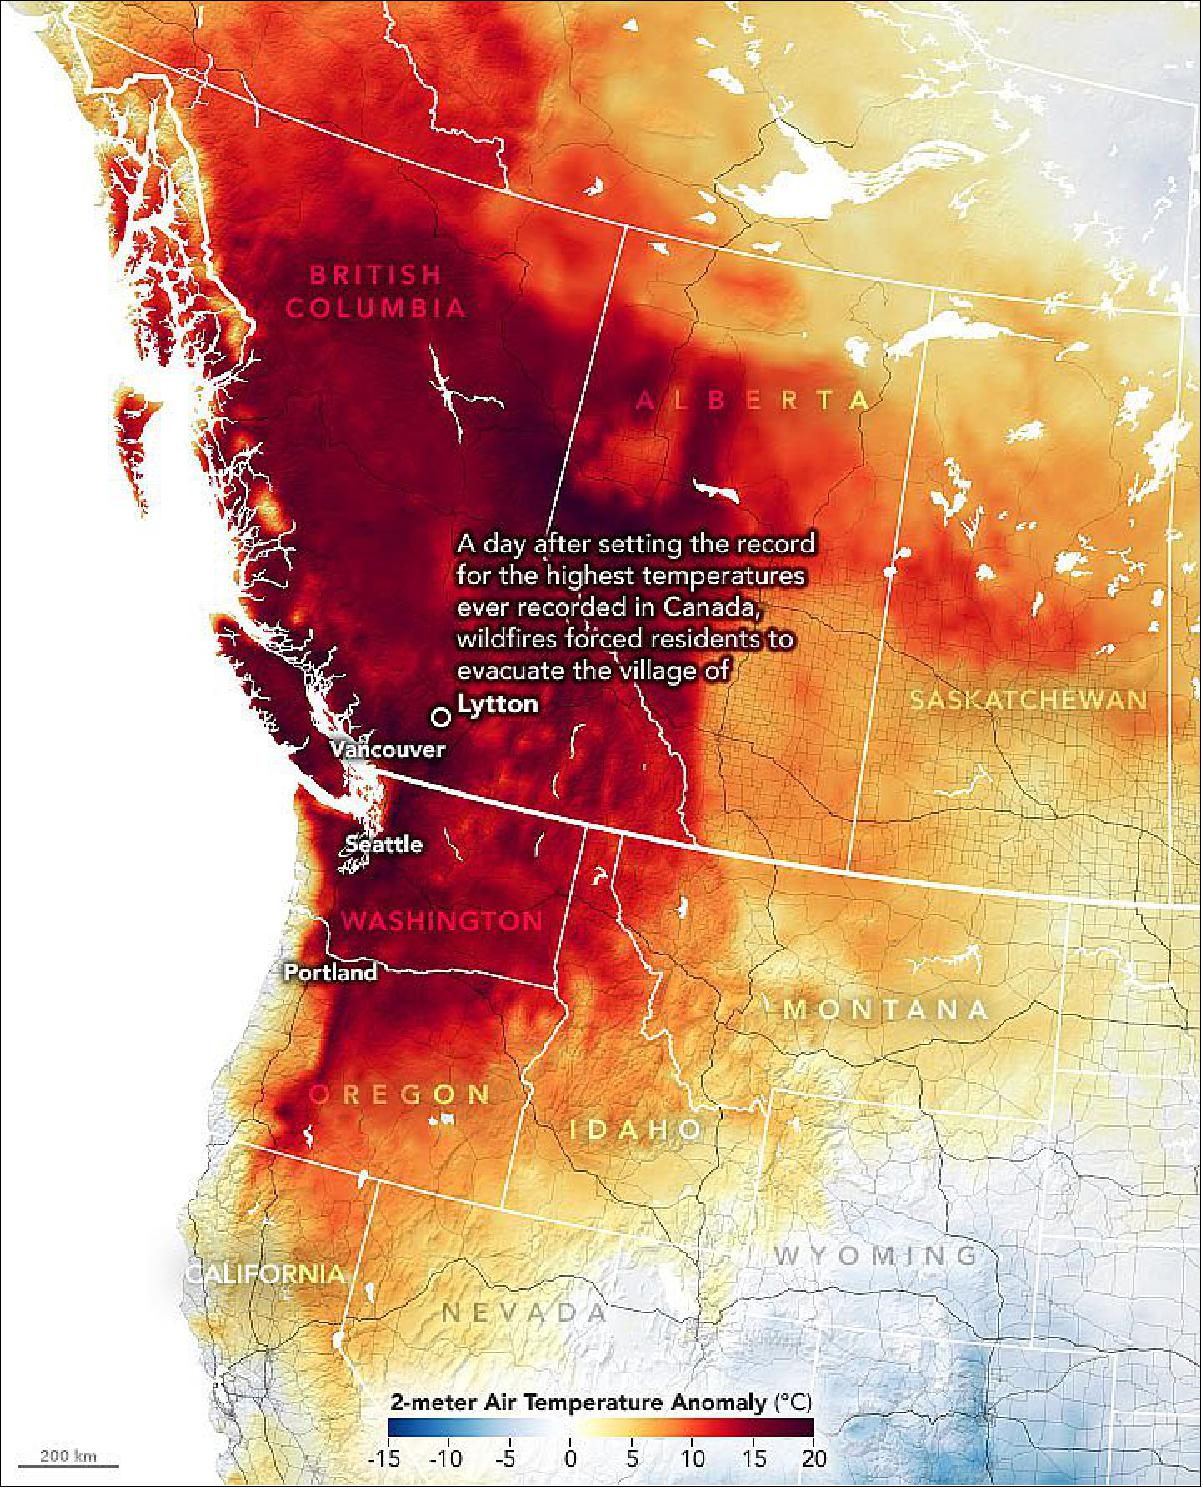 Figure 29: The map shows air temperature anomalies across the western United States and Canada on June 29, 2021. The map is derived from the Goddard Earth Observing System (GEOS) model and depicts air temperatures at 2 meters (about 6.5 feet) above the ground. The darkest red areas are where air temperatures were 36°F (20°C) higher than the 2014-2020 average for the same day (image credit: NASA Earth Observatory)